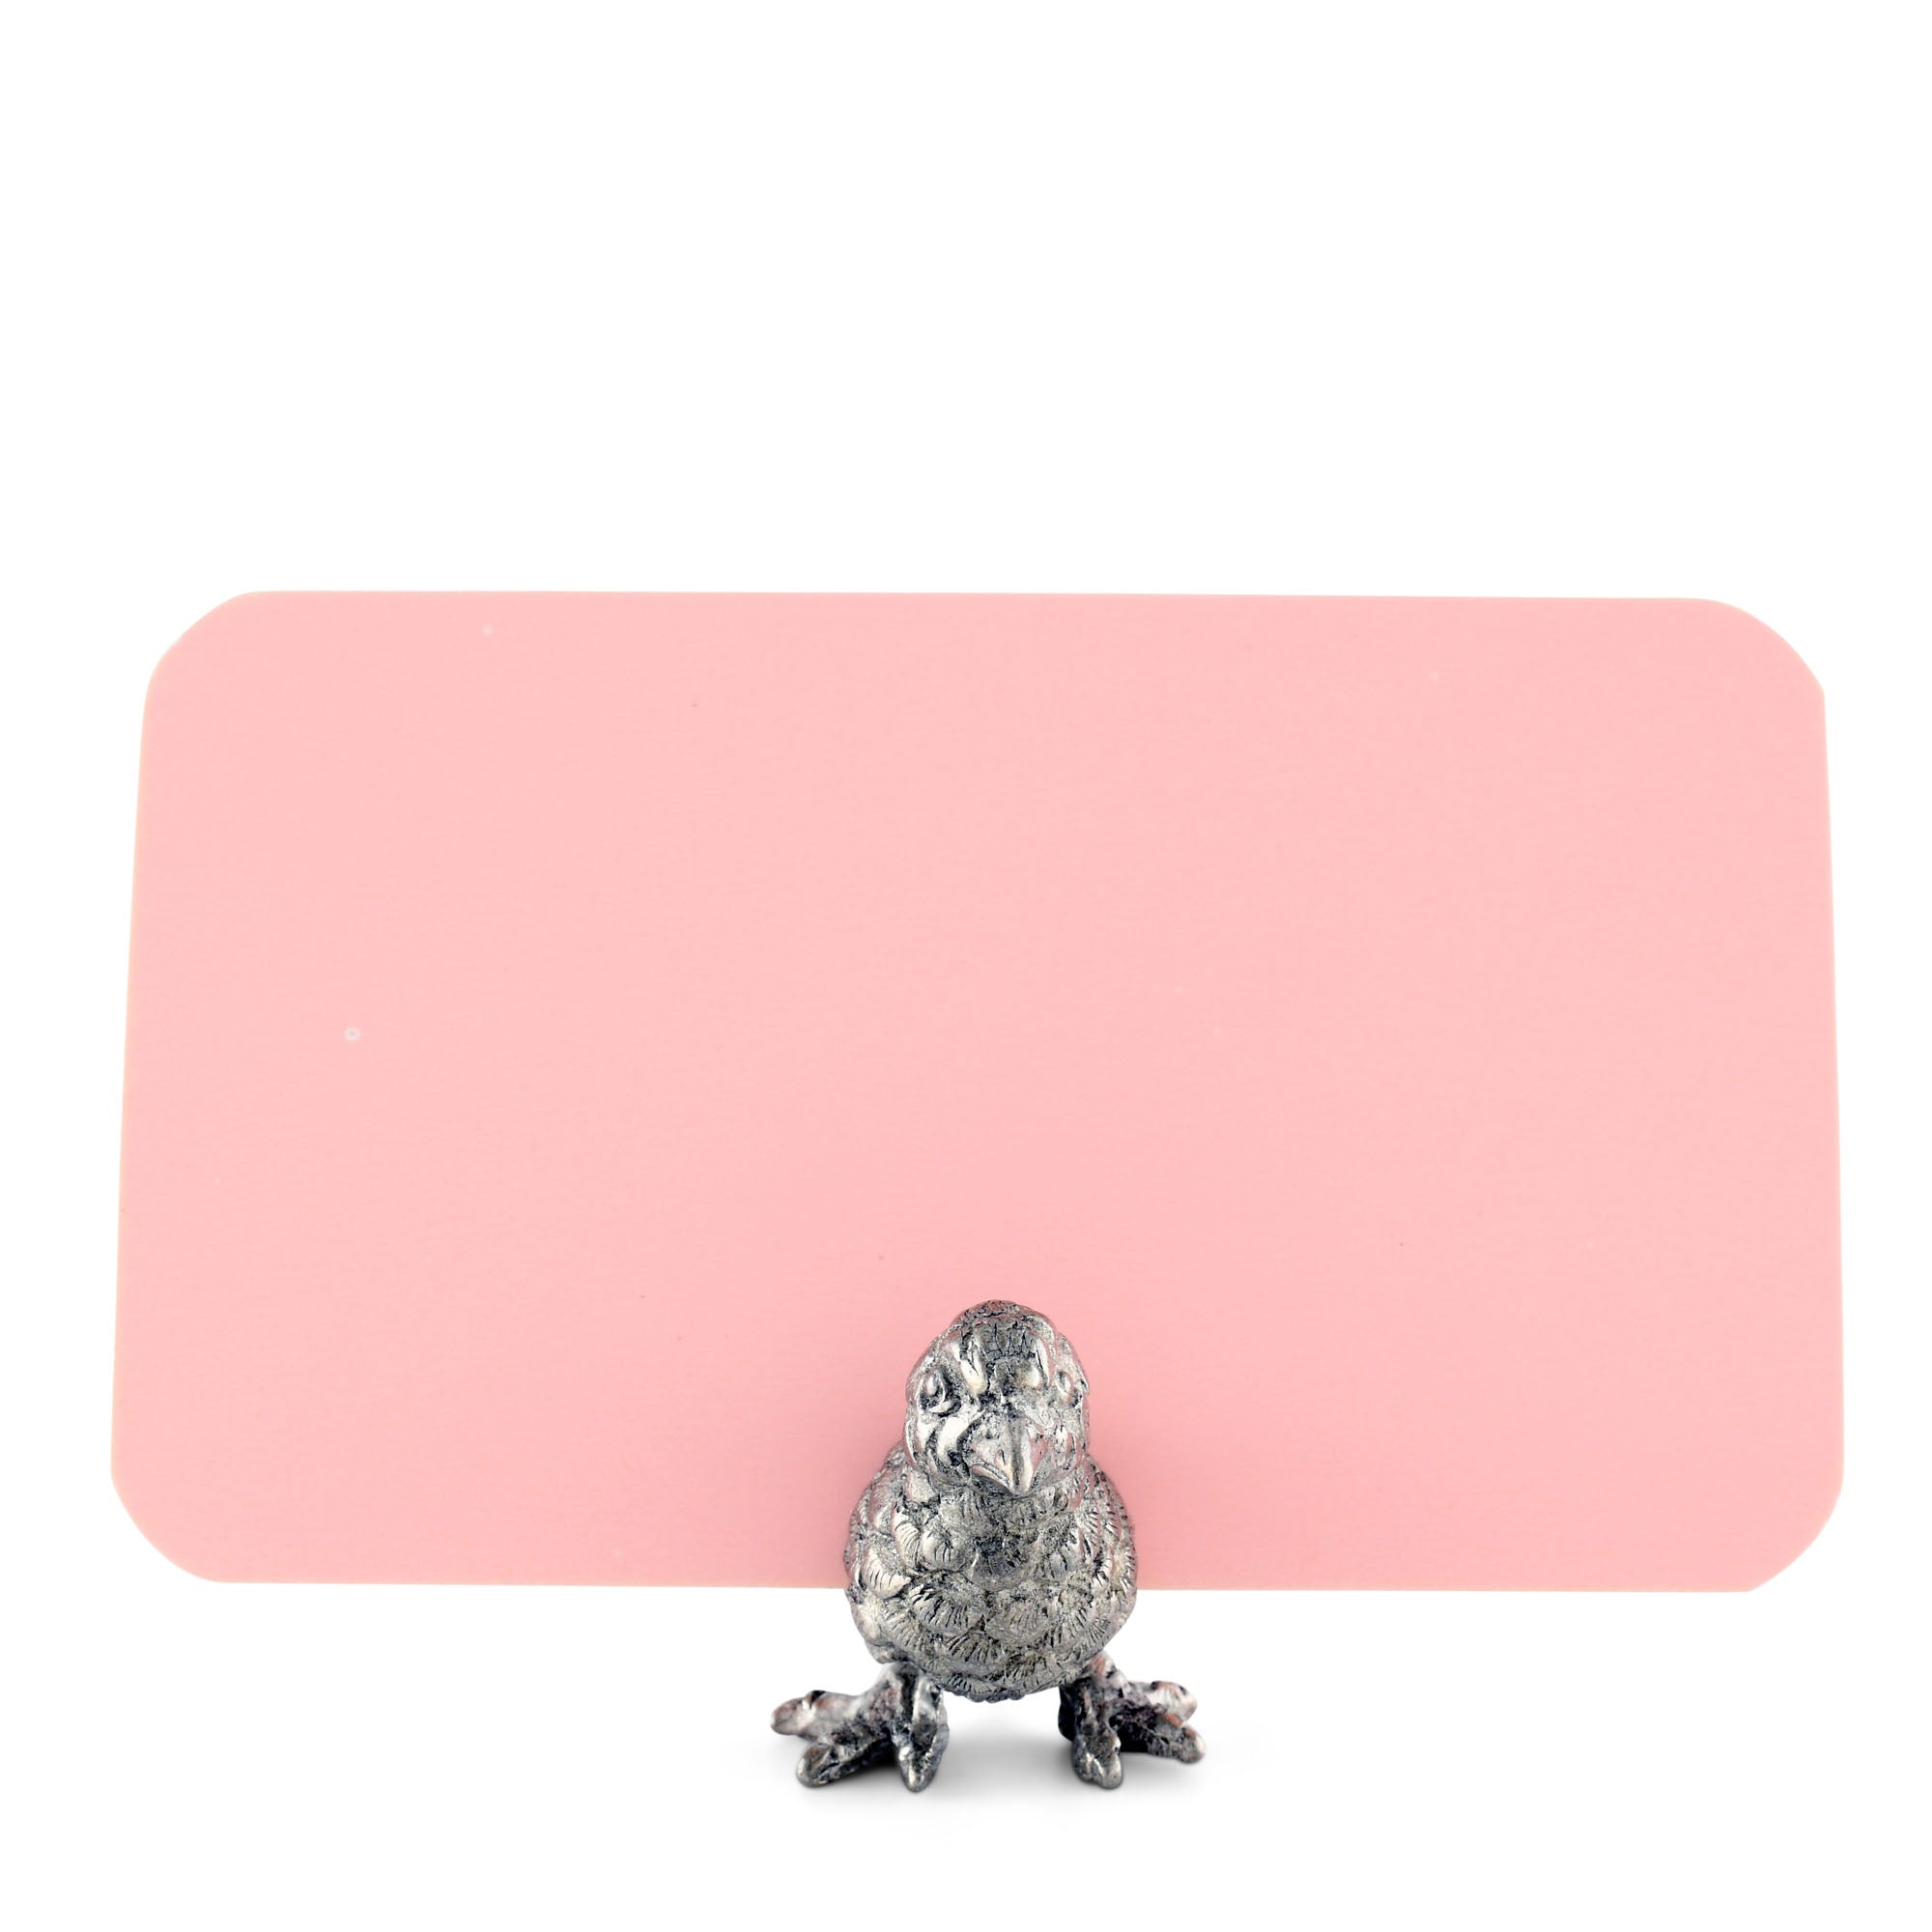 Vagabond House Pewter Song Bird Place Card Holder Product Image